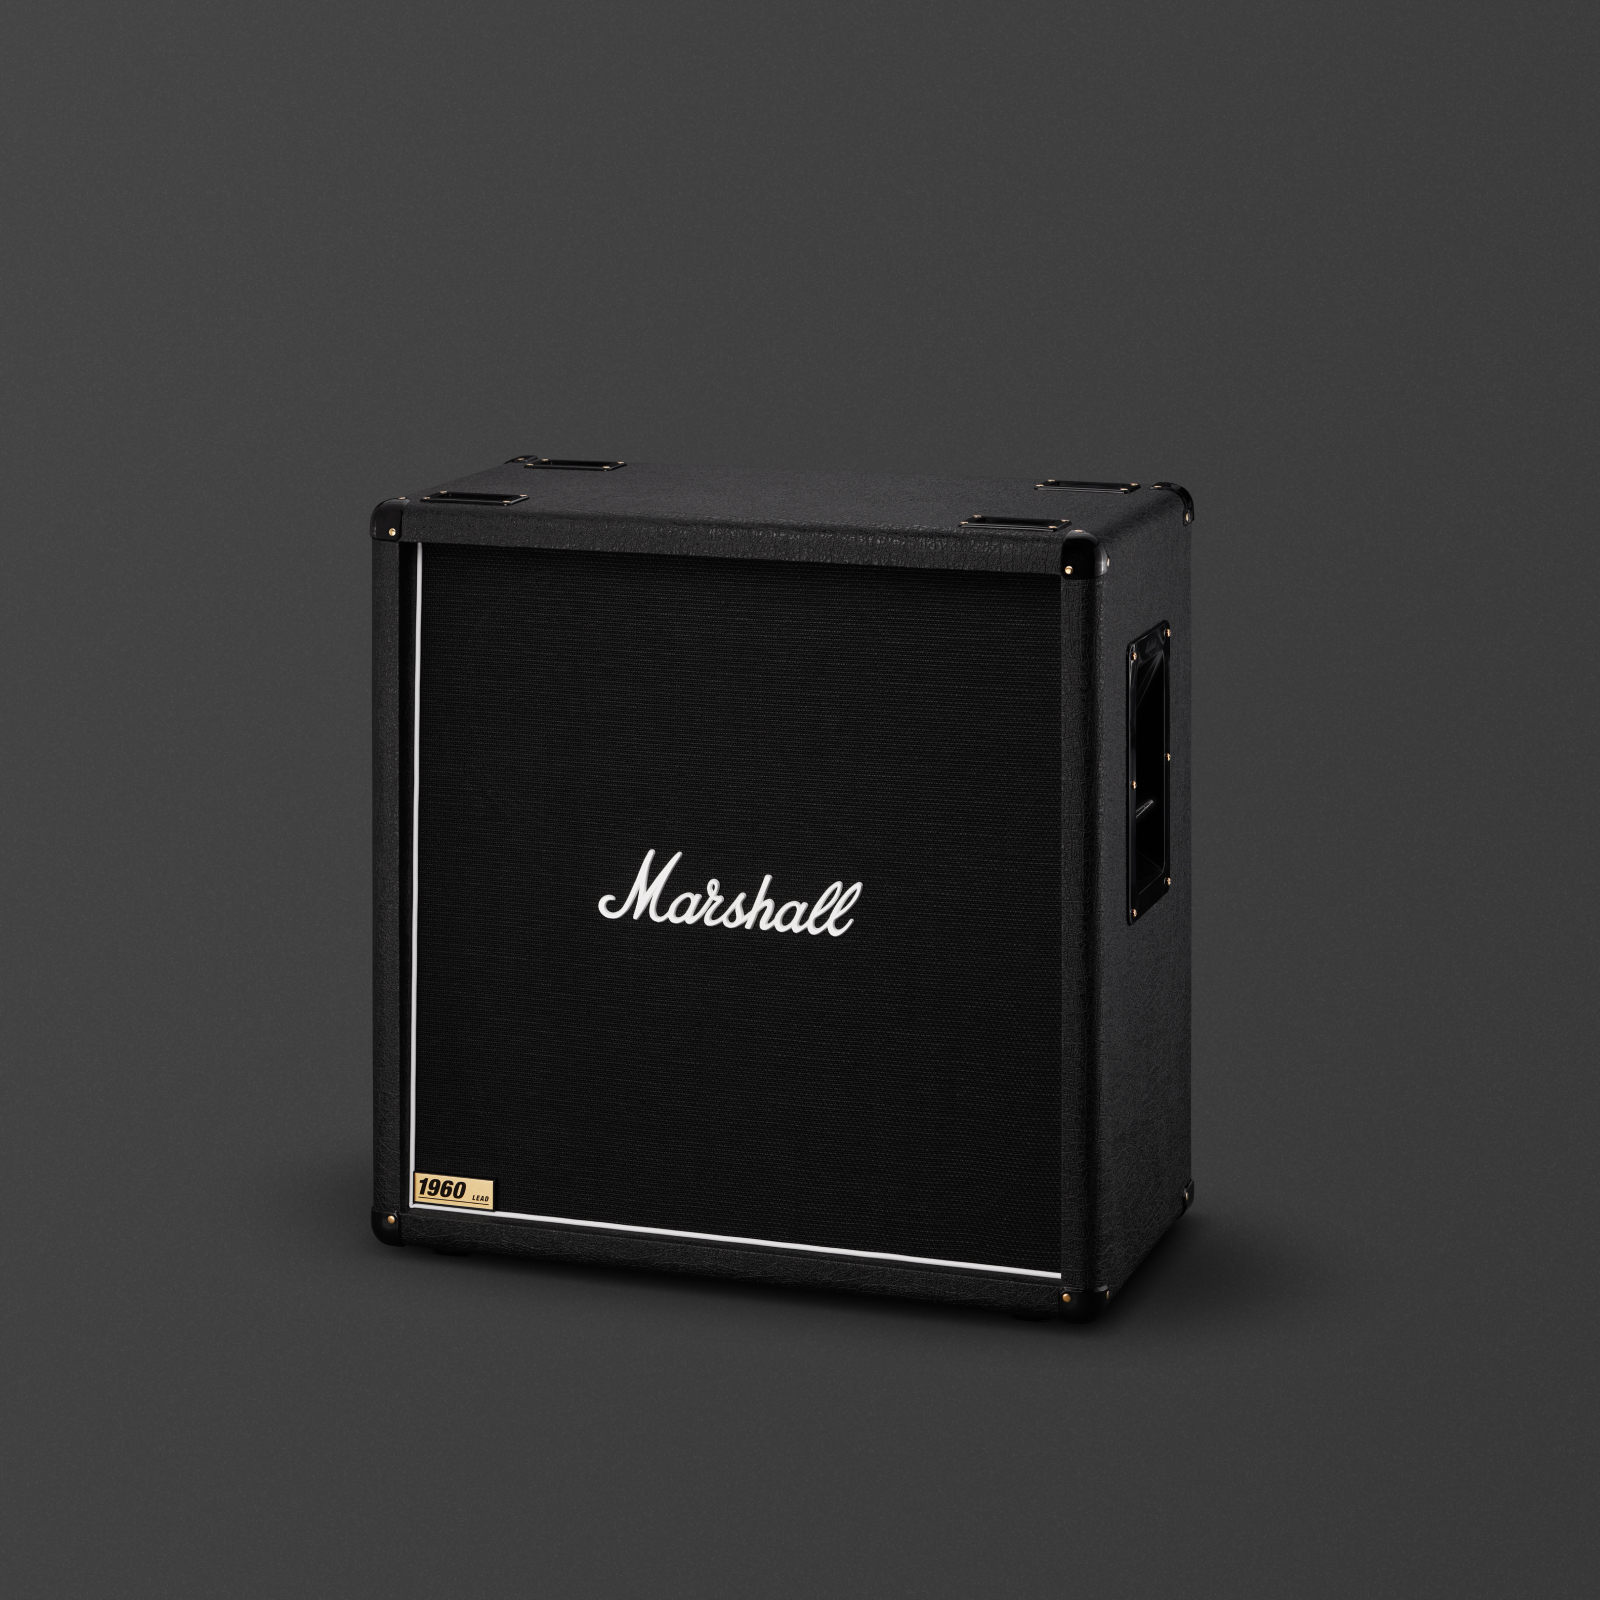 Cabinet with an authentic 60’s design and pack plenty of power with 300W.  